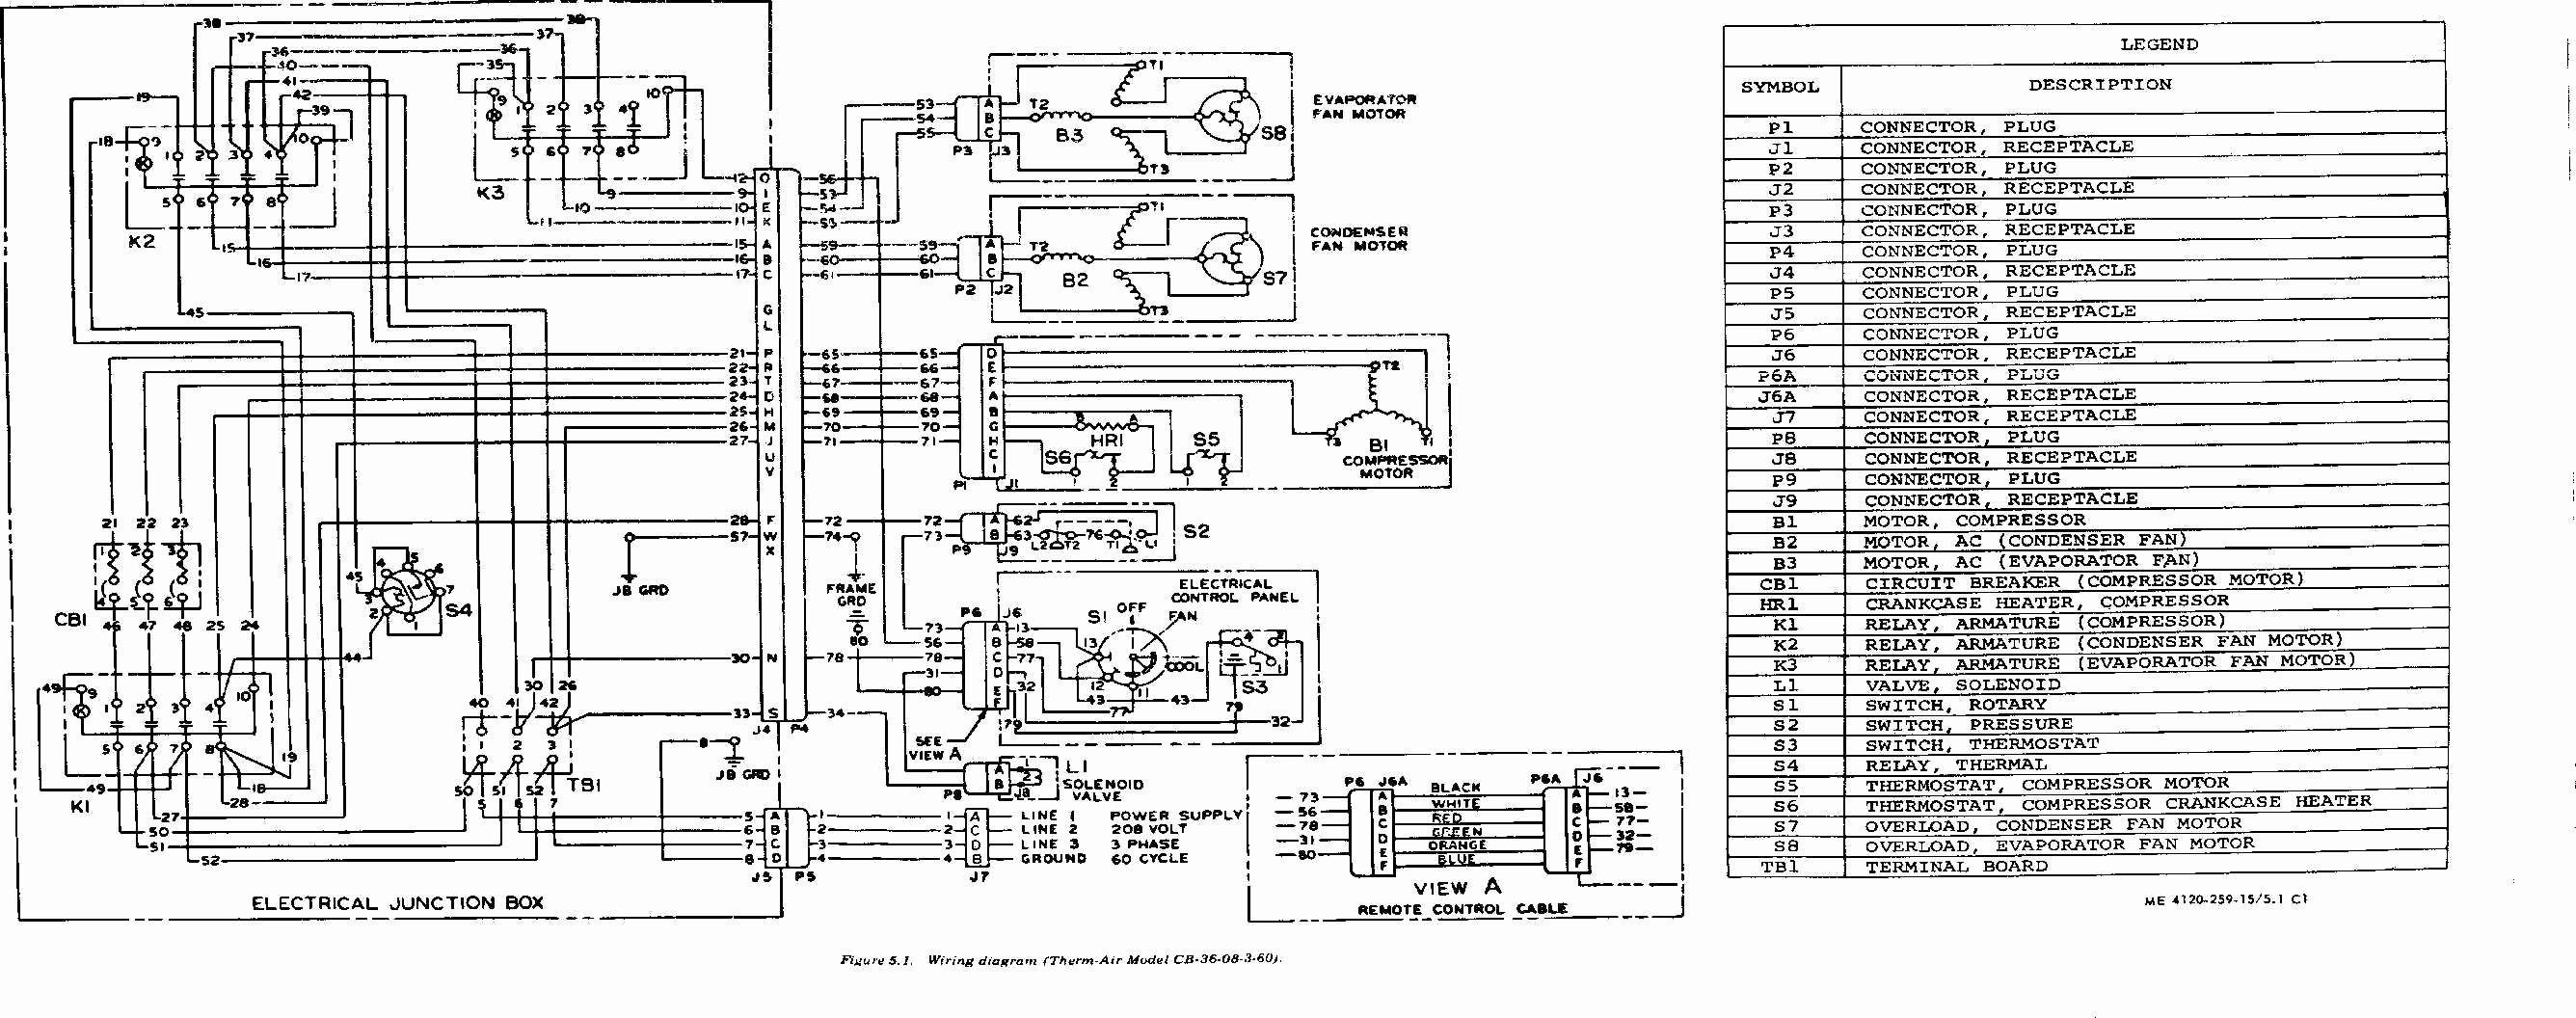 Full Size of Wiring Diagram How To Read Wiring Diagrams Beautiful Payne Heat Pump Thermostatng